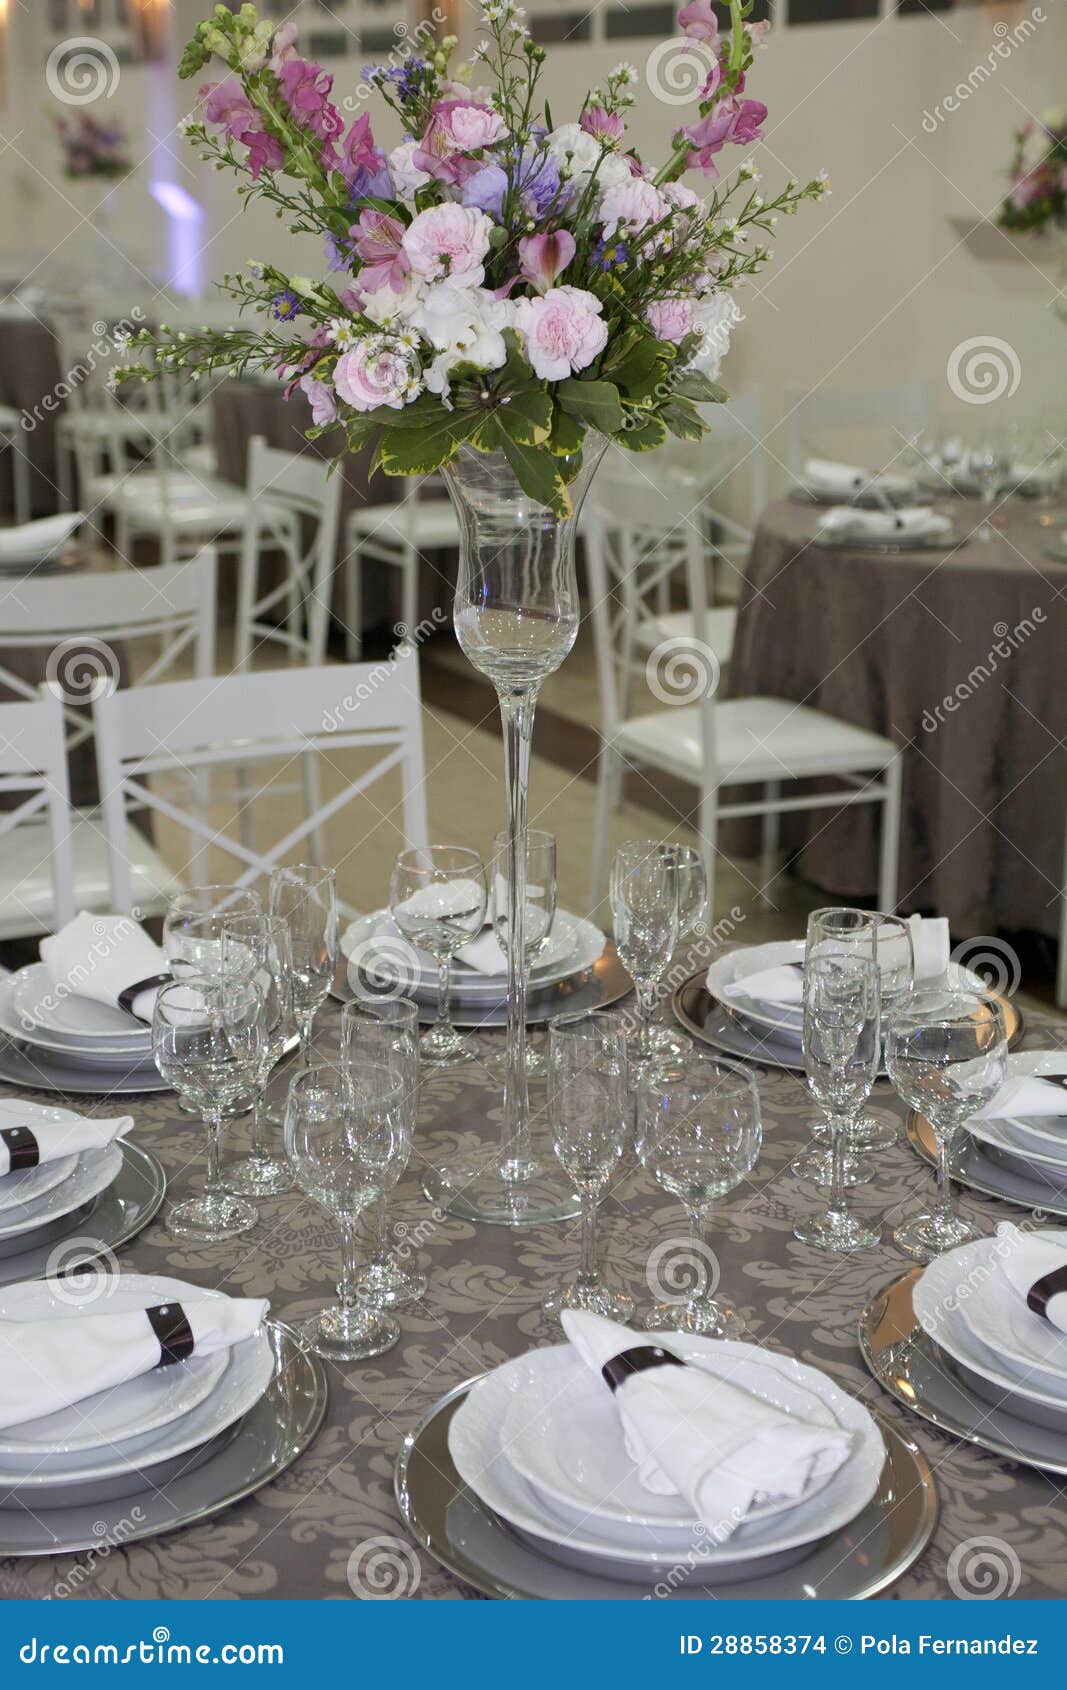 table set for party